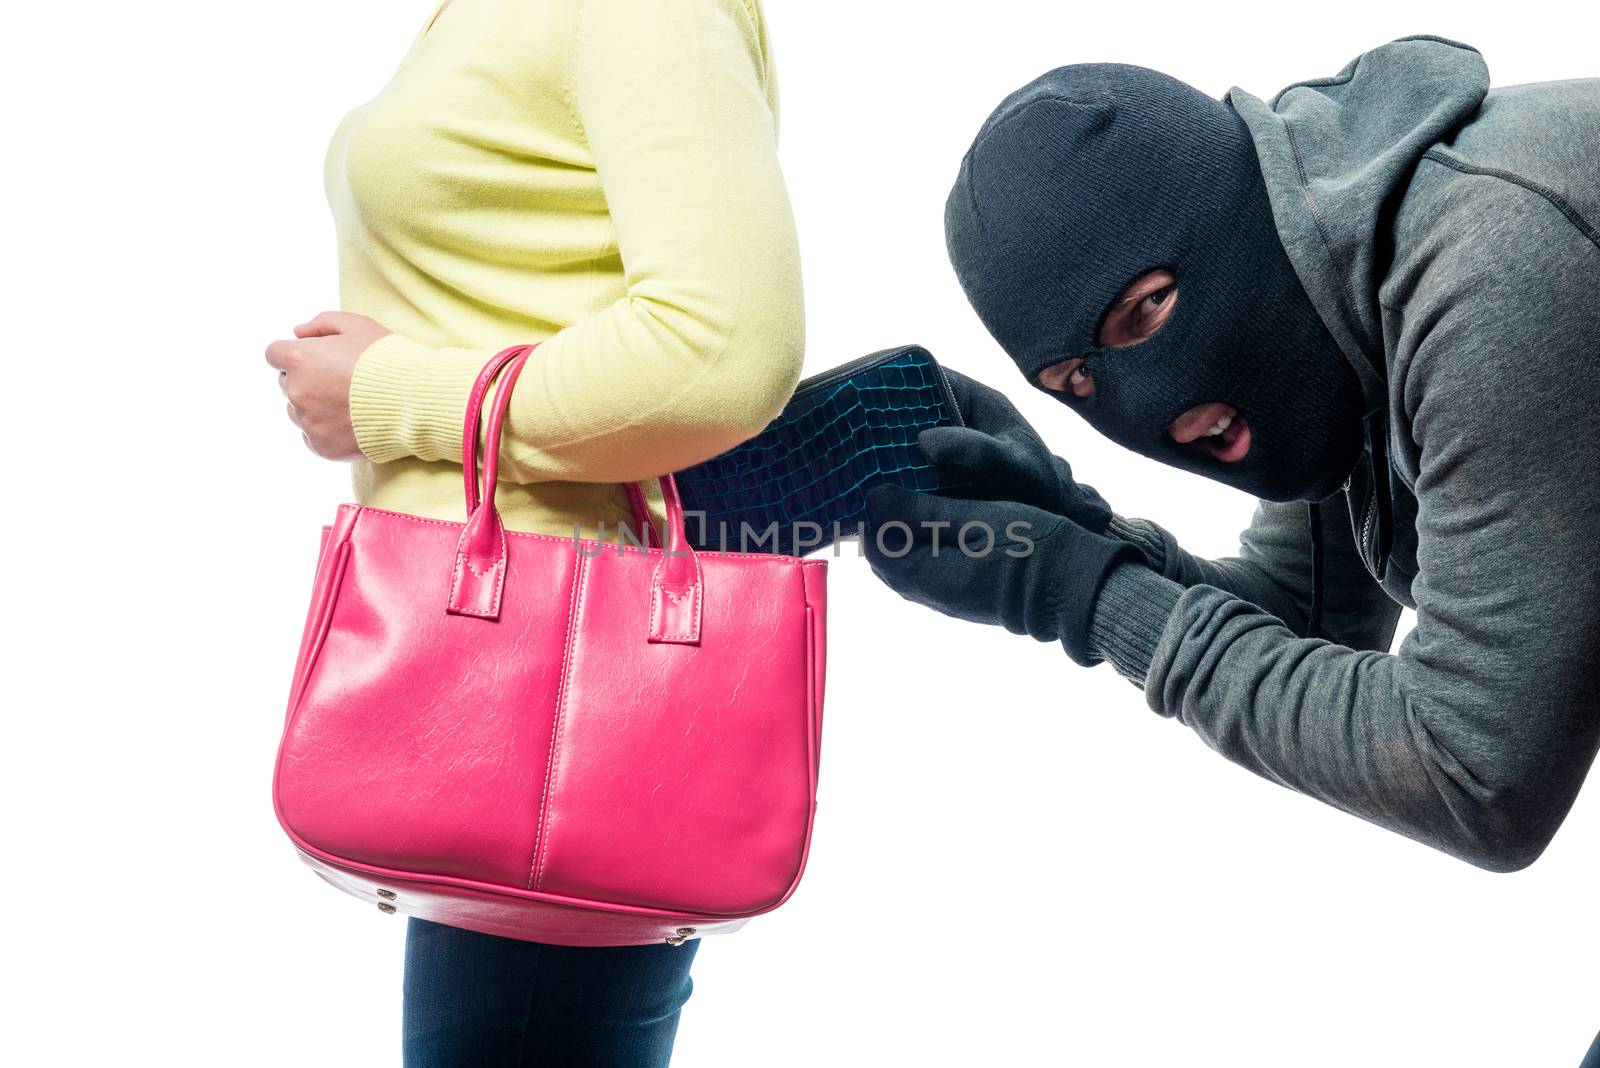 A thief pickpocket steals a purse from a women's bag in a balacl by kosmsos111